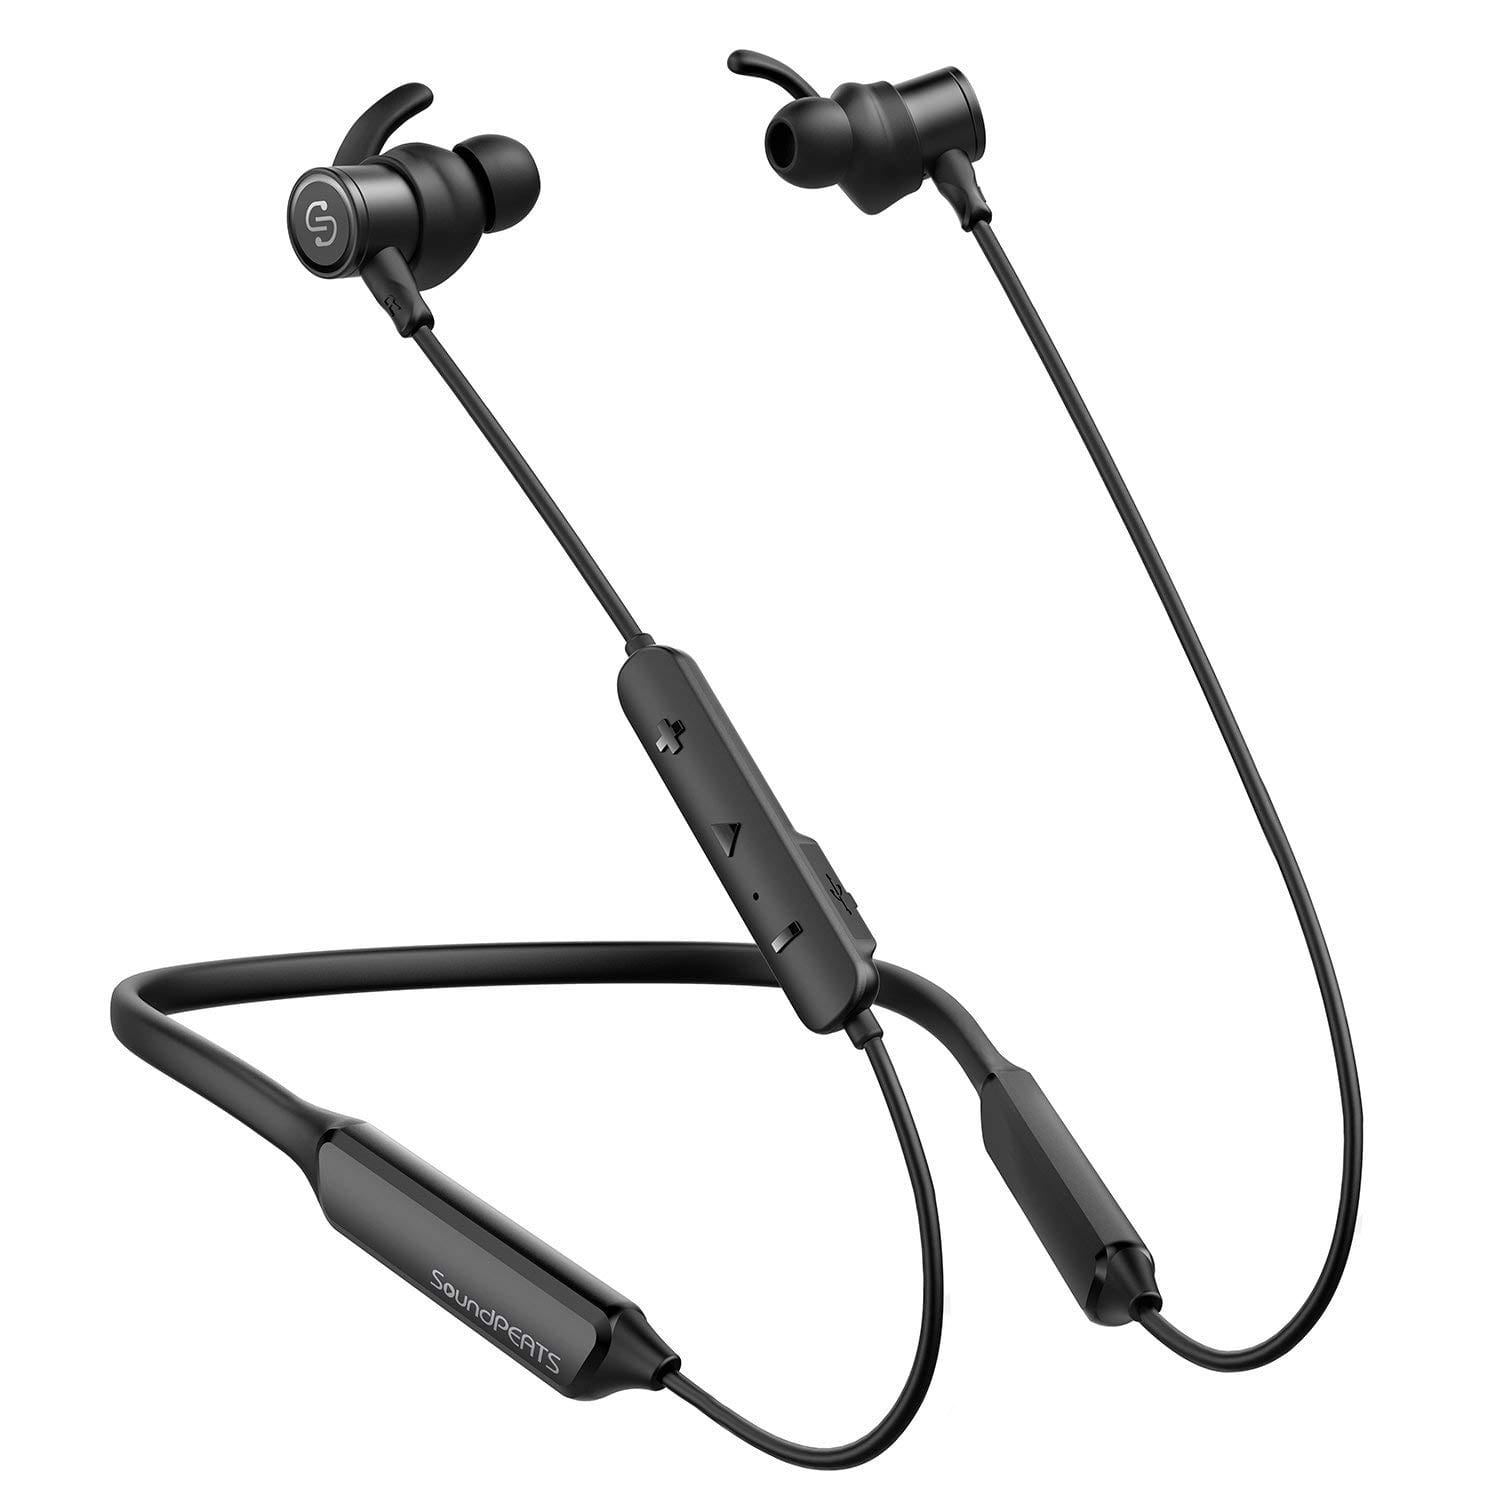 SoundPEATS Force Earphones - My Helpful Hints® Product Review